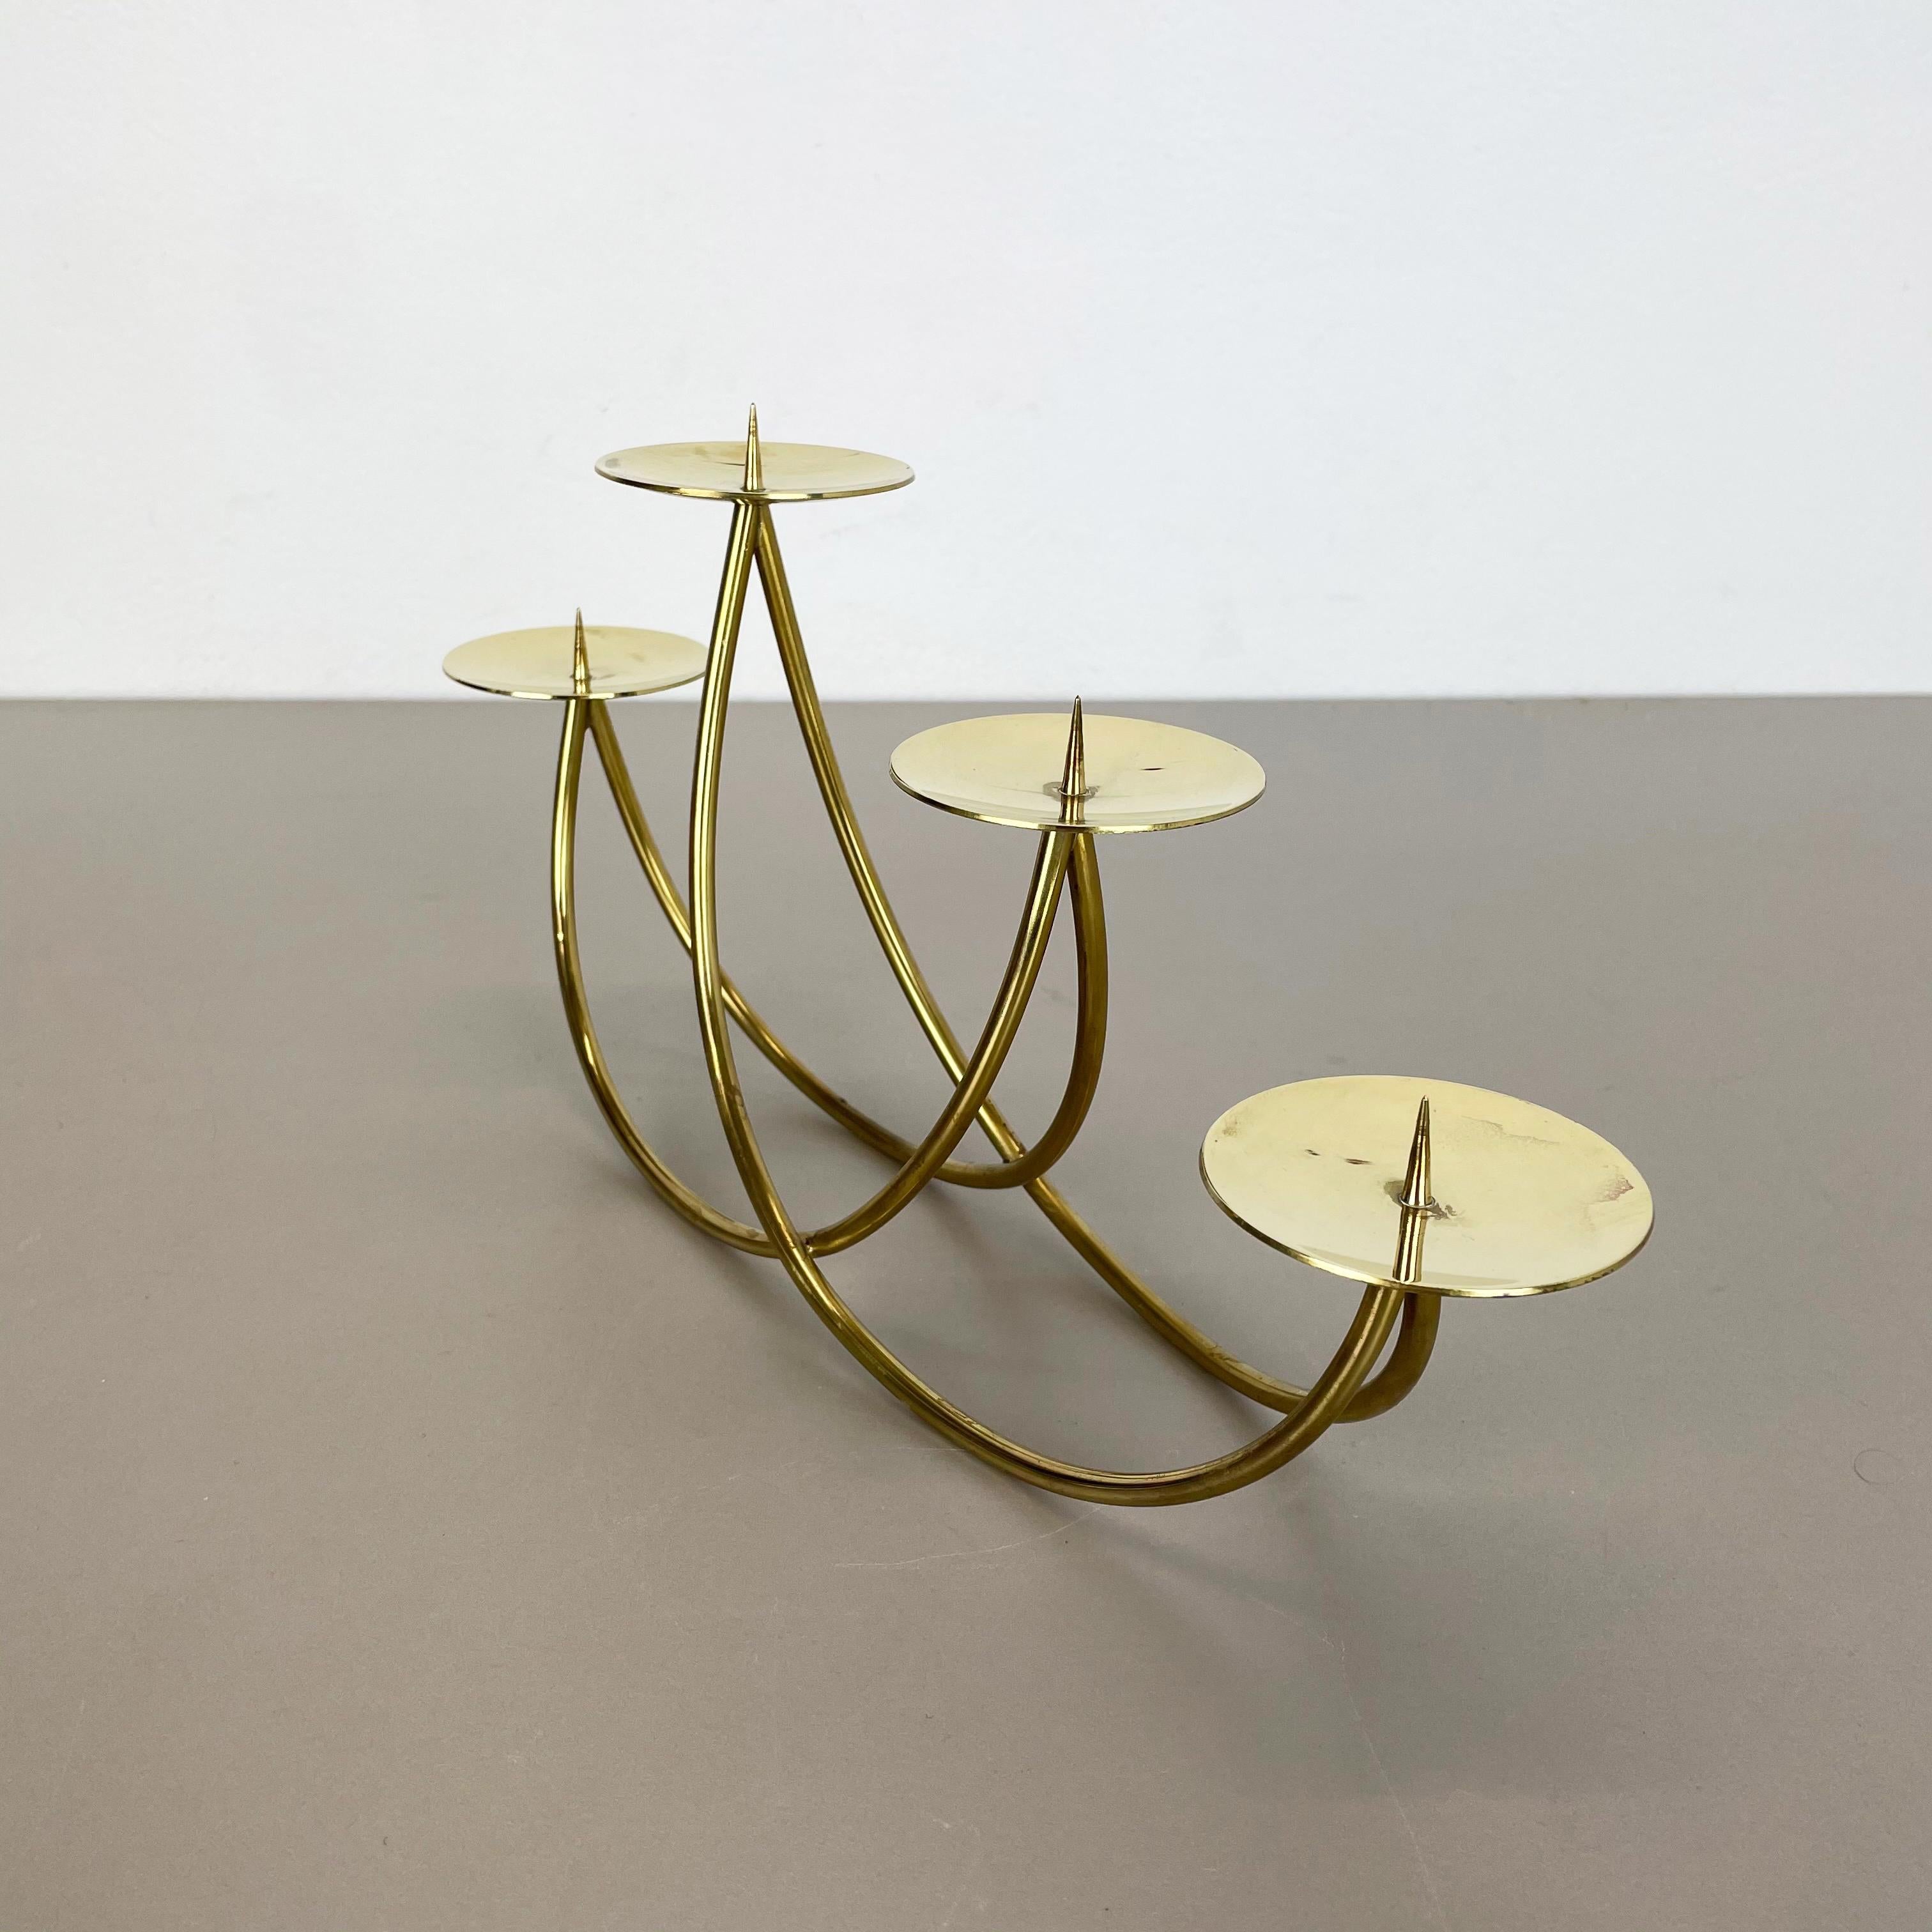 Sculptural Solid Brass Candleholder by Harald Buchrucker Bauhaus, Germany, 1950s For Sale 7